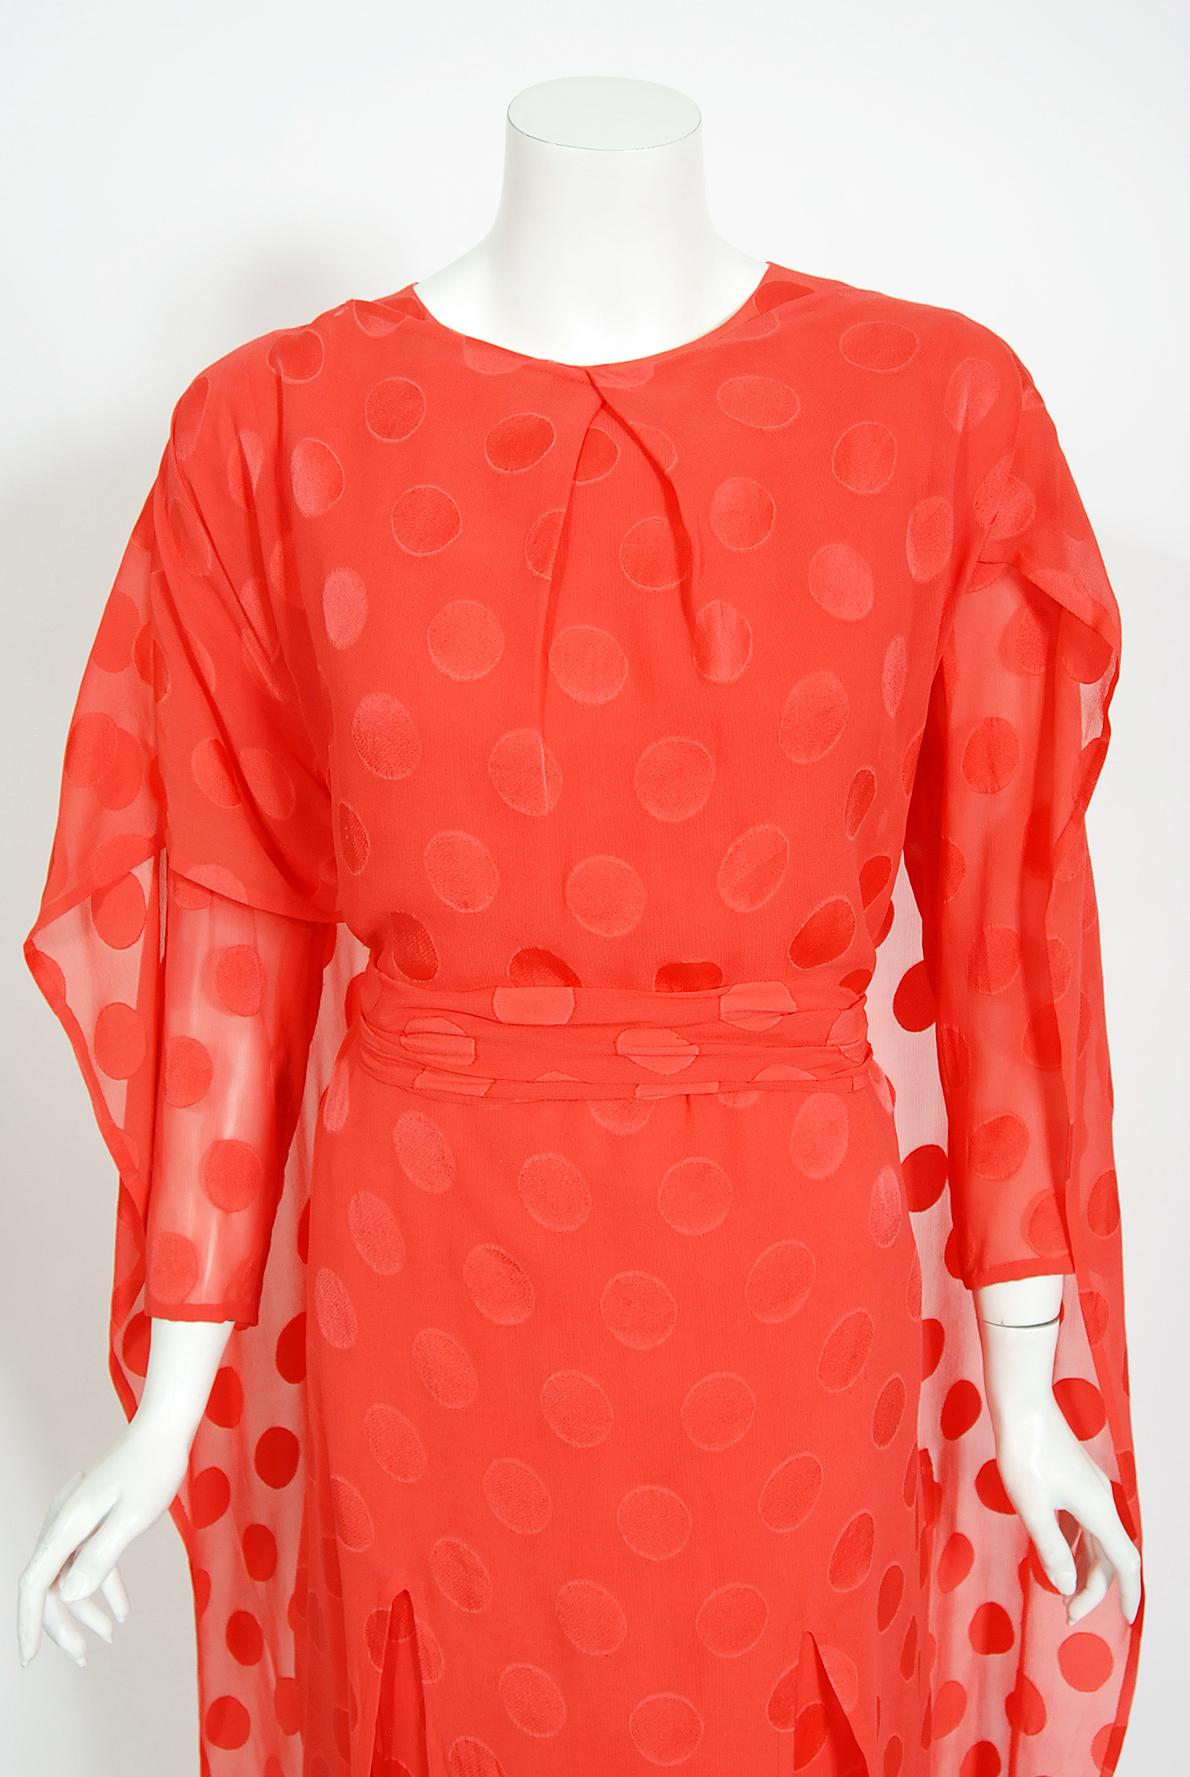 Vintage 1973 Givenchy Haute Couture Orange Dotted Silk Carwash-Hem Caftan Gown For Sale 6